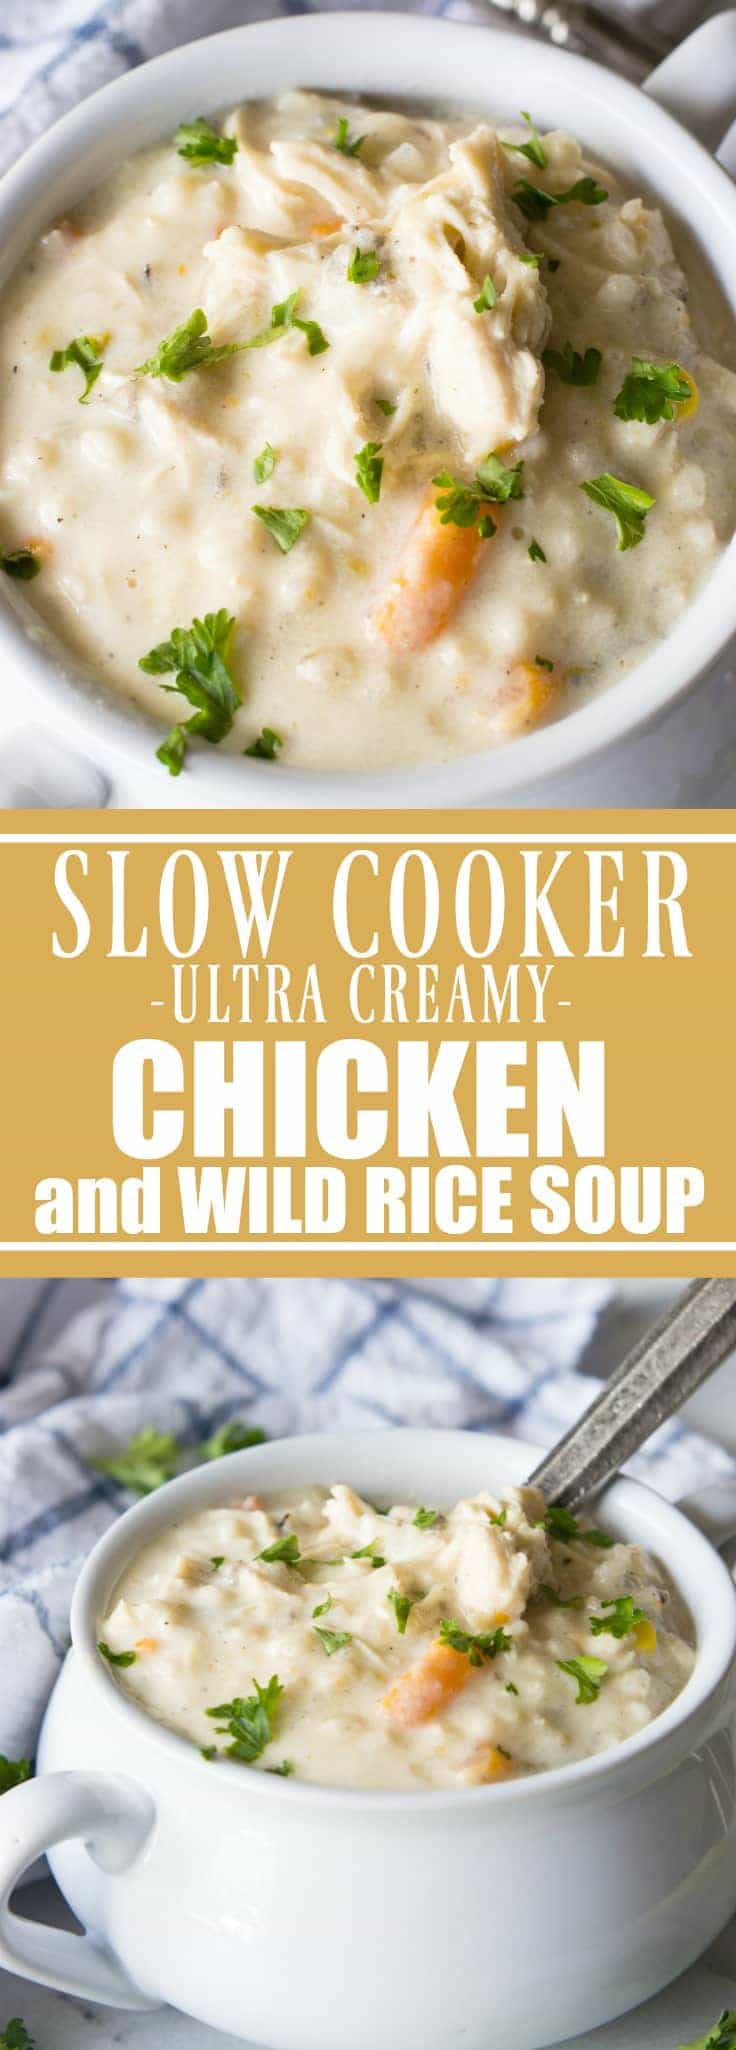 Slow Cooker Creamy Chicken and Wild Rice Soup (No cream or butter ...